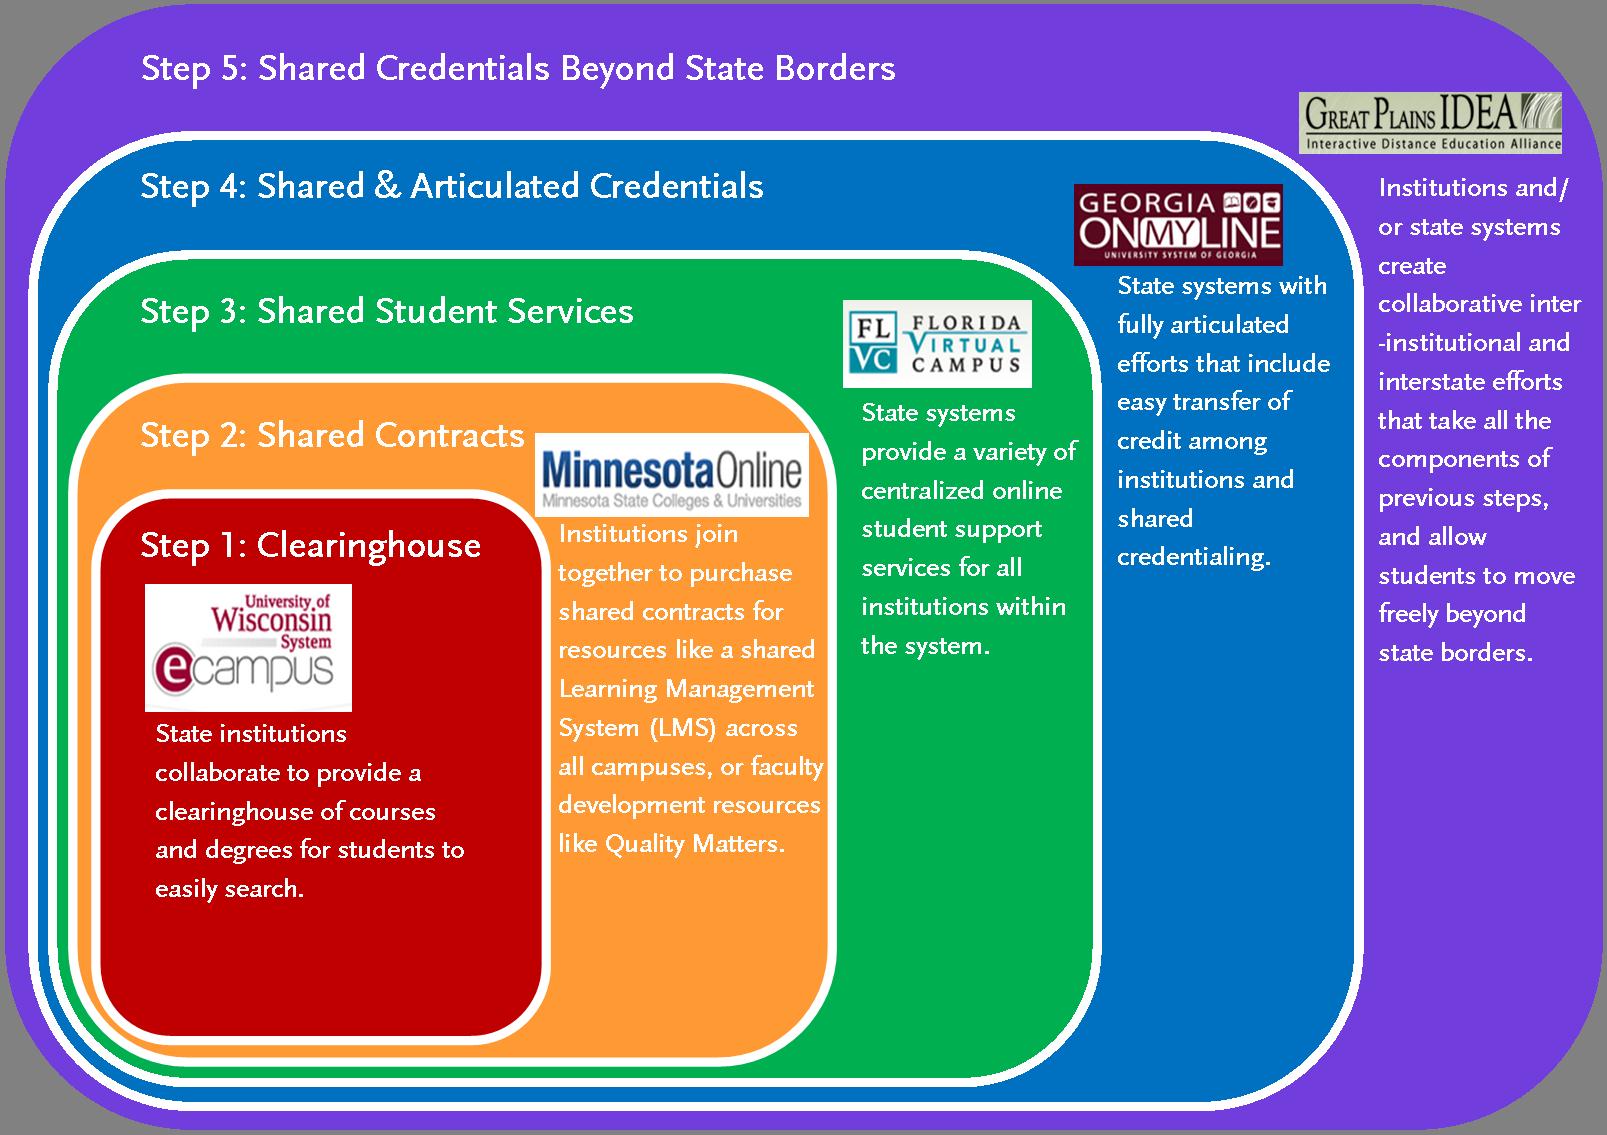 Graphic with five "steps" of collaboration:  1) Clearhinghouse, 2) Shared Contracts, 3) Shared Student Services, 4) Shared & Articulated Credentials, and 5) Shared Credentials Beyond State Borders 